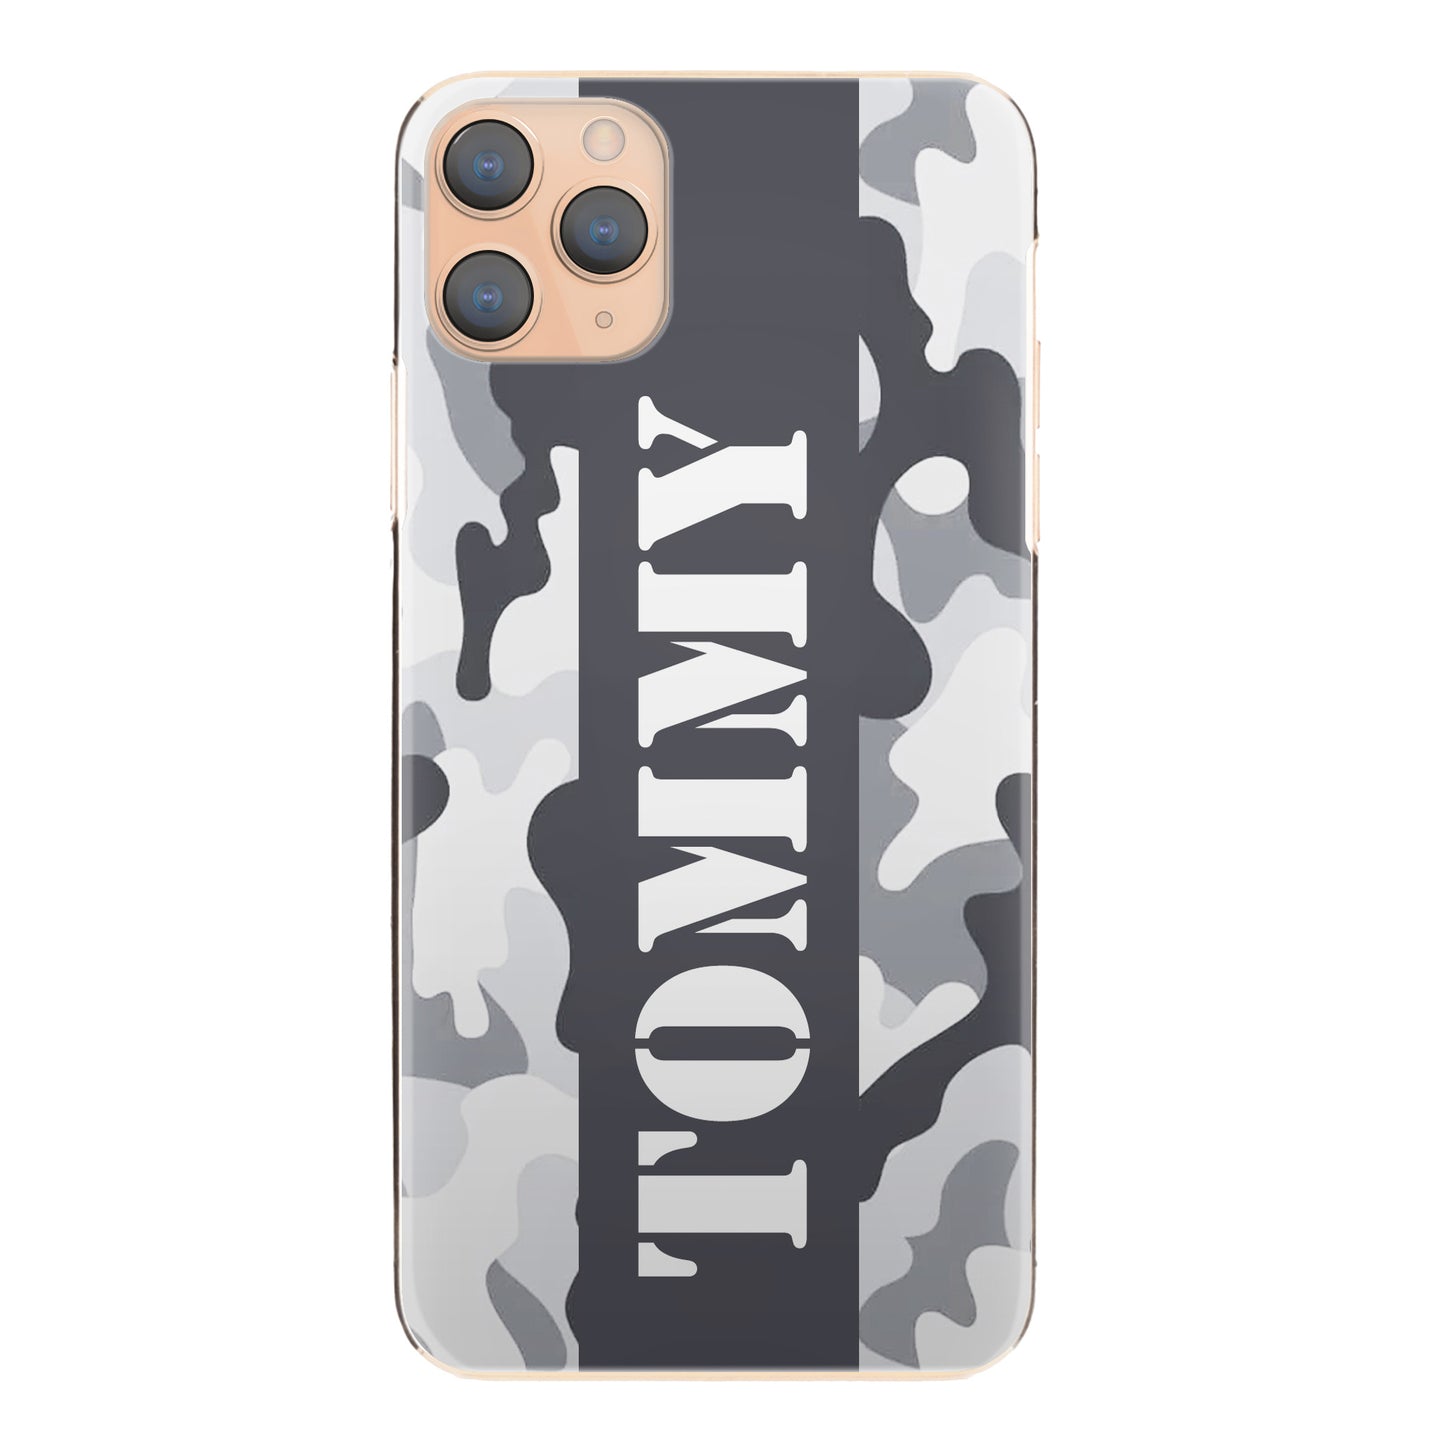 Personalised Google Phone Hard Case with Military Text on Artic Camo